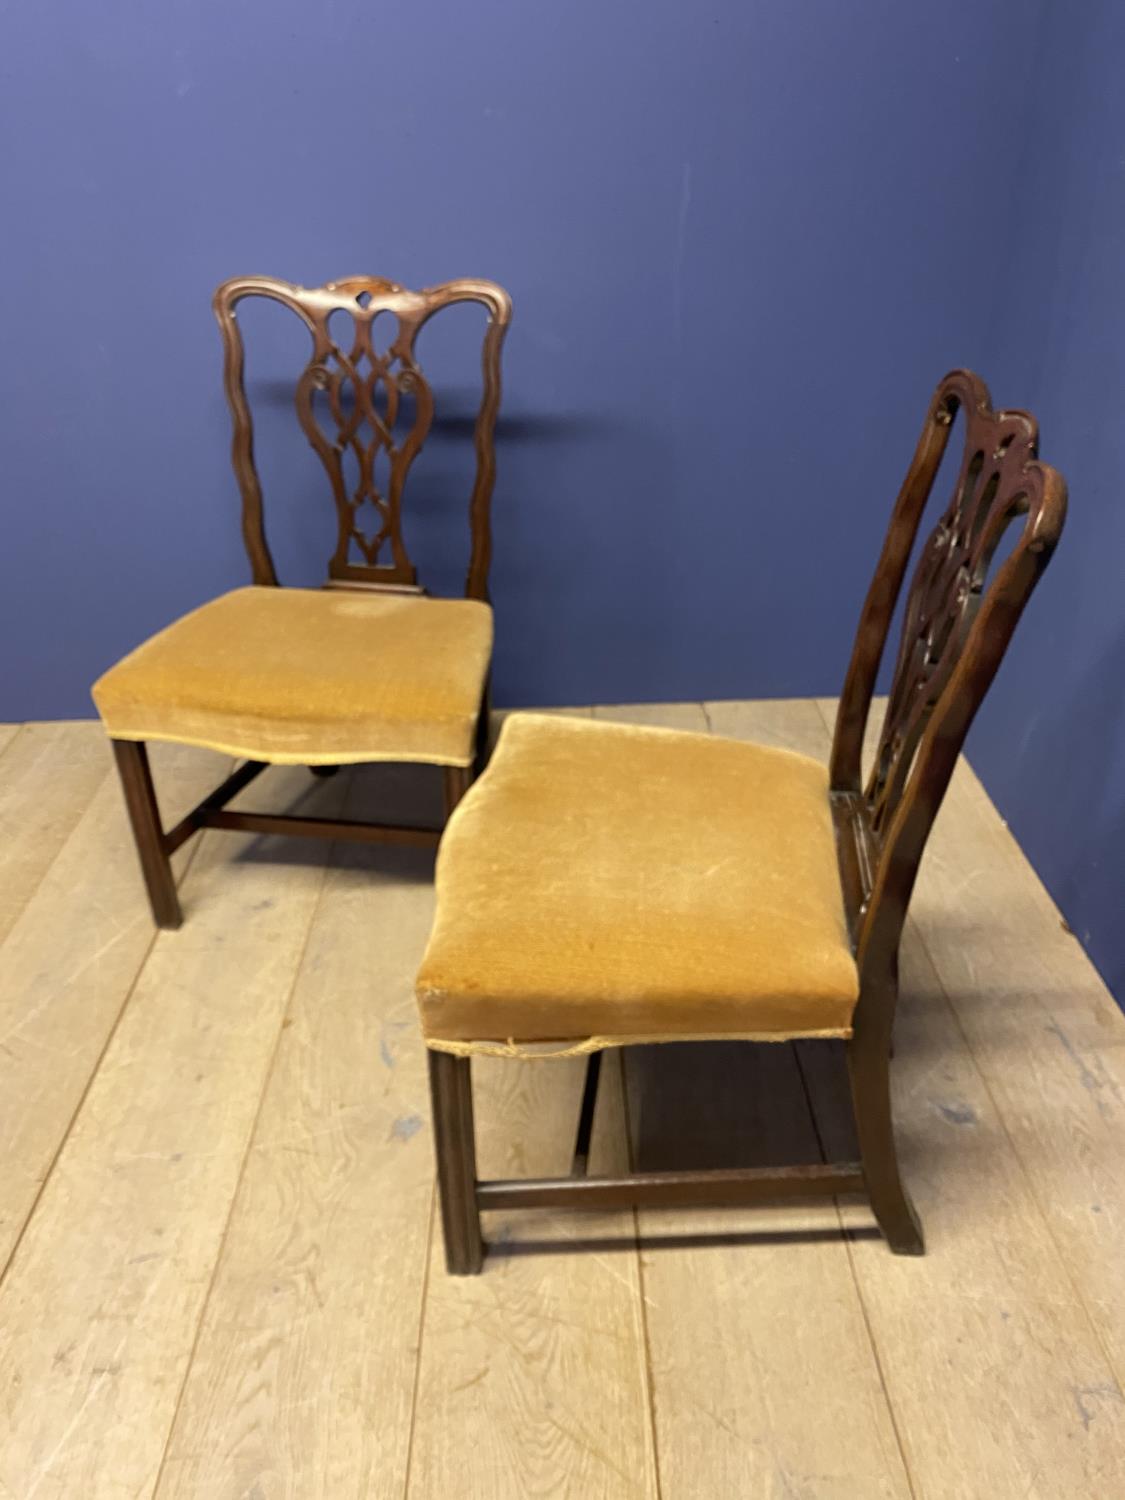 Pair of good C19th mahogany Chippendale style side chairs - Image 2 of 3